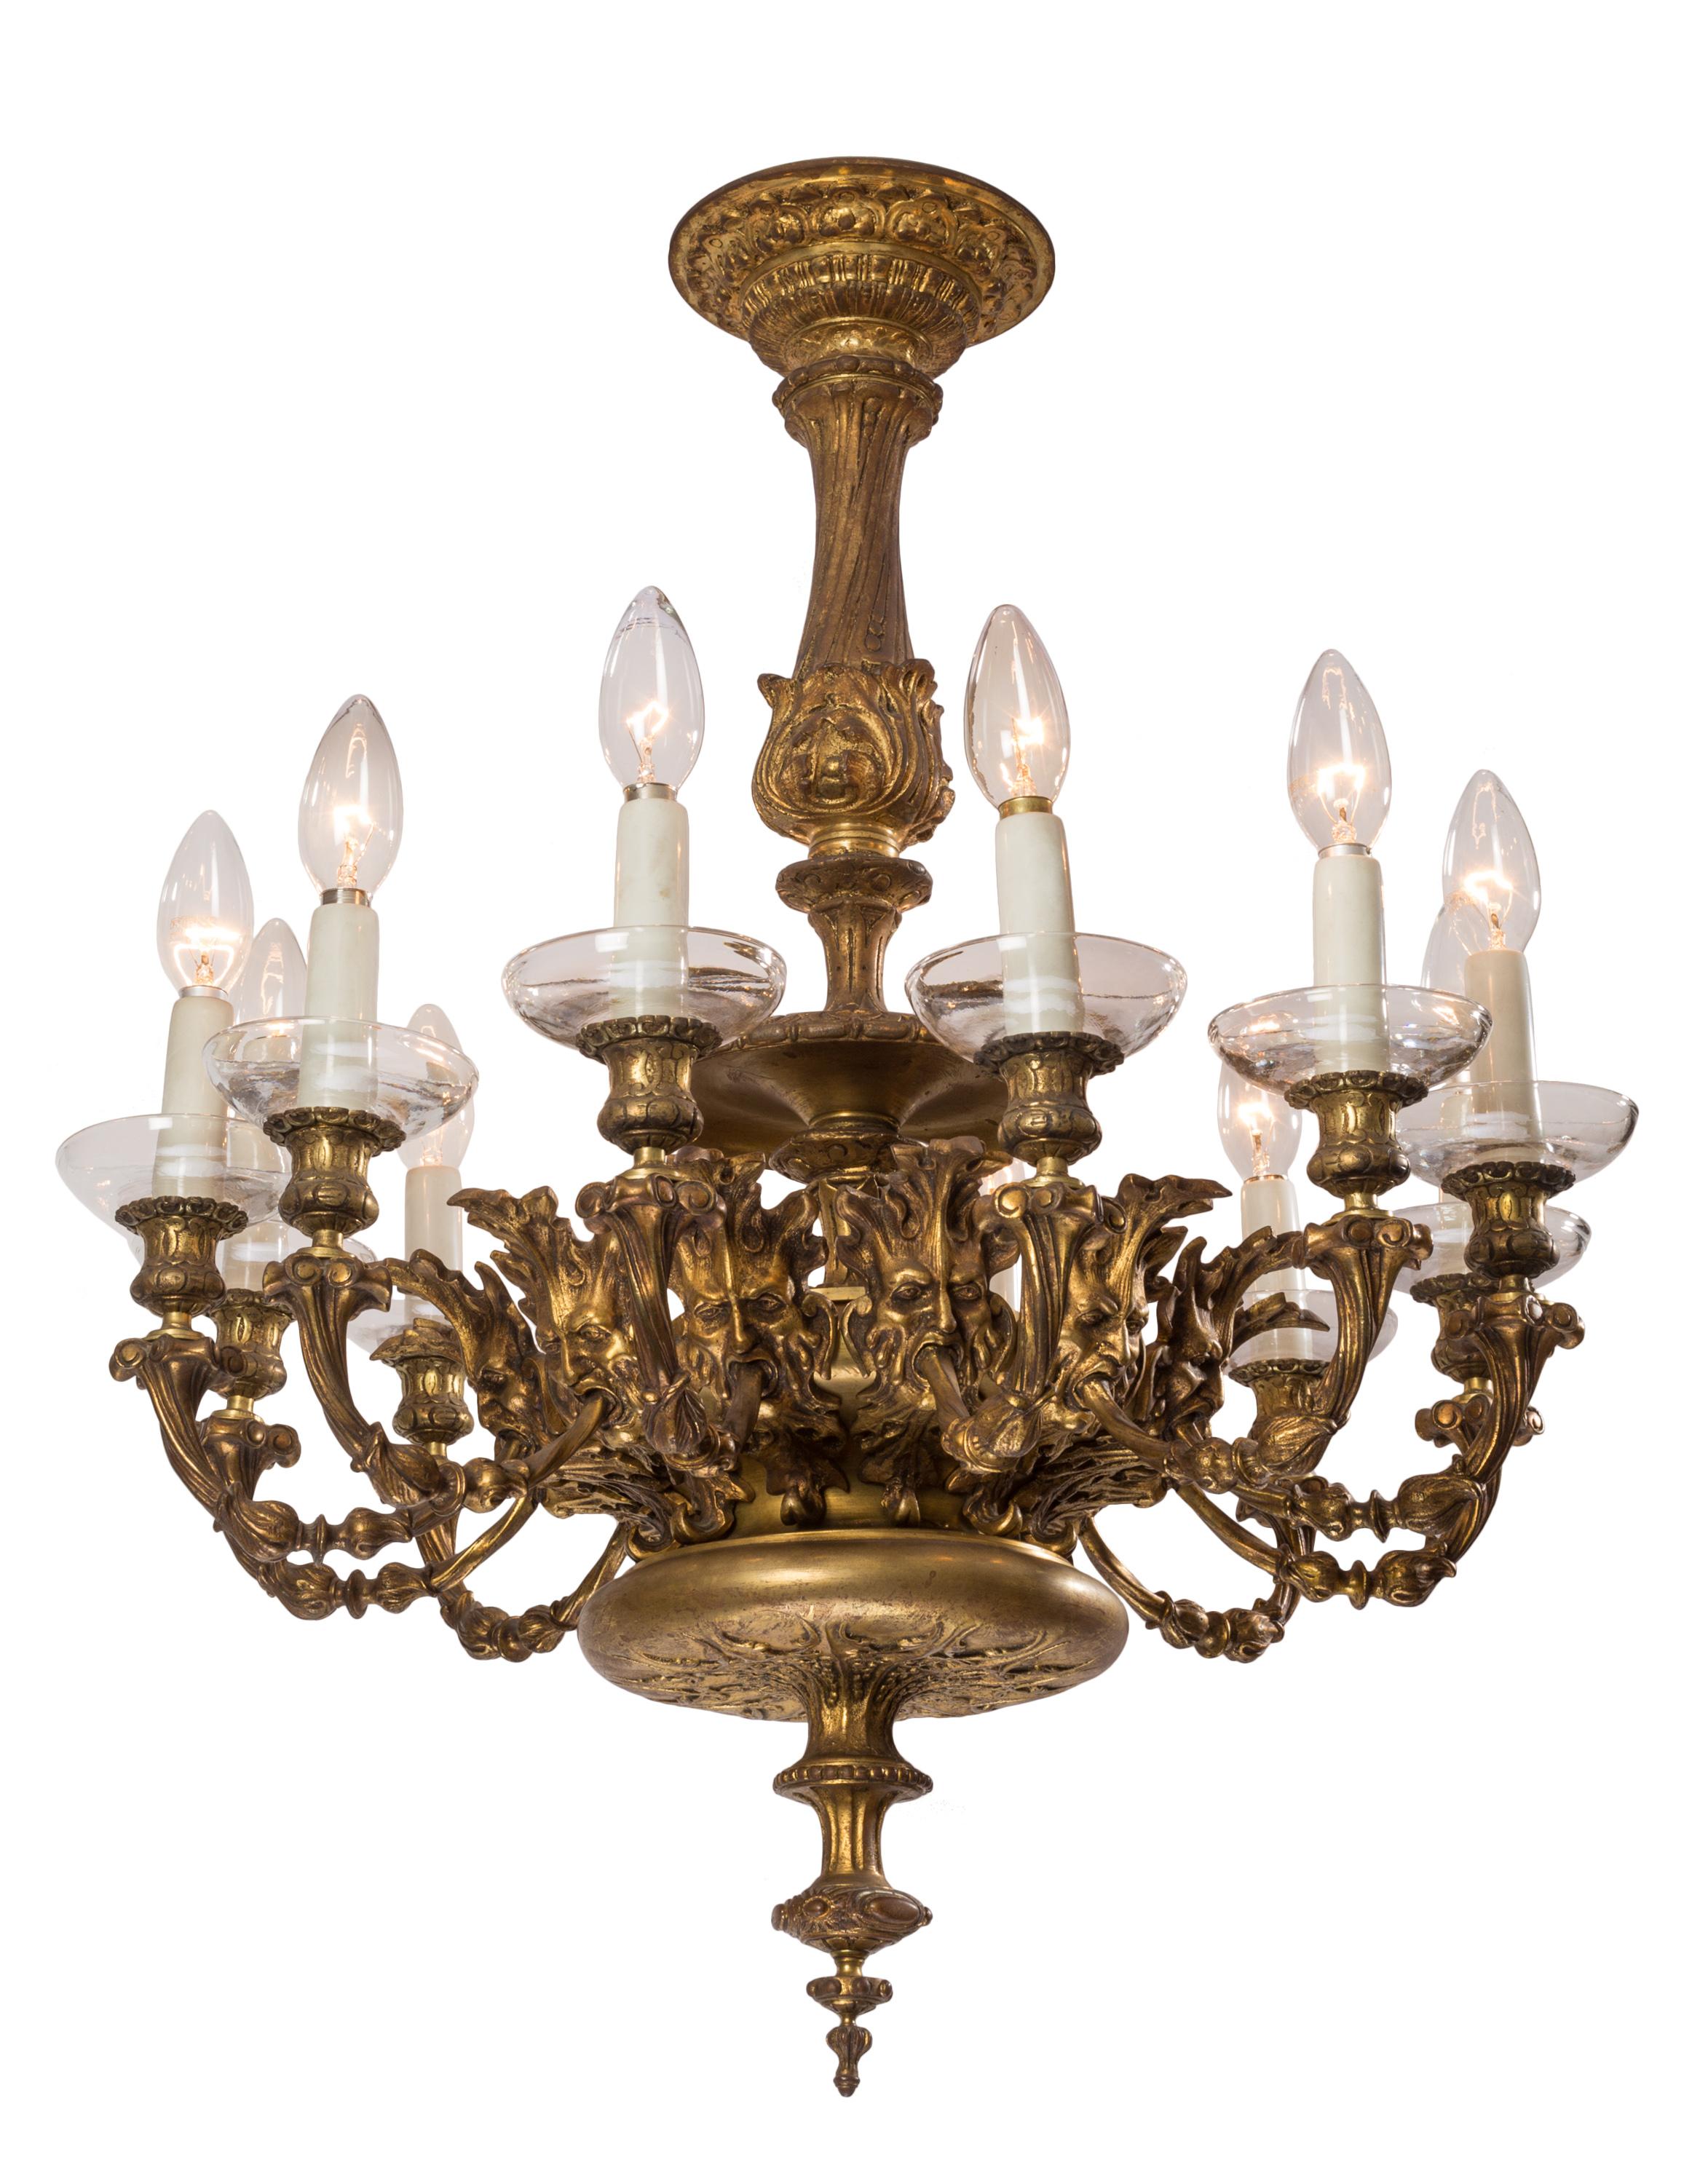 French Victorian Gilt Brass 12-Light Chandelier with Sculptural Green Man Motif For Sale 3